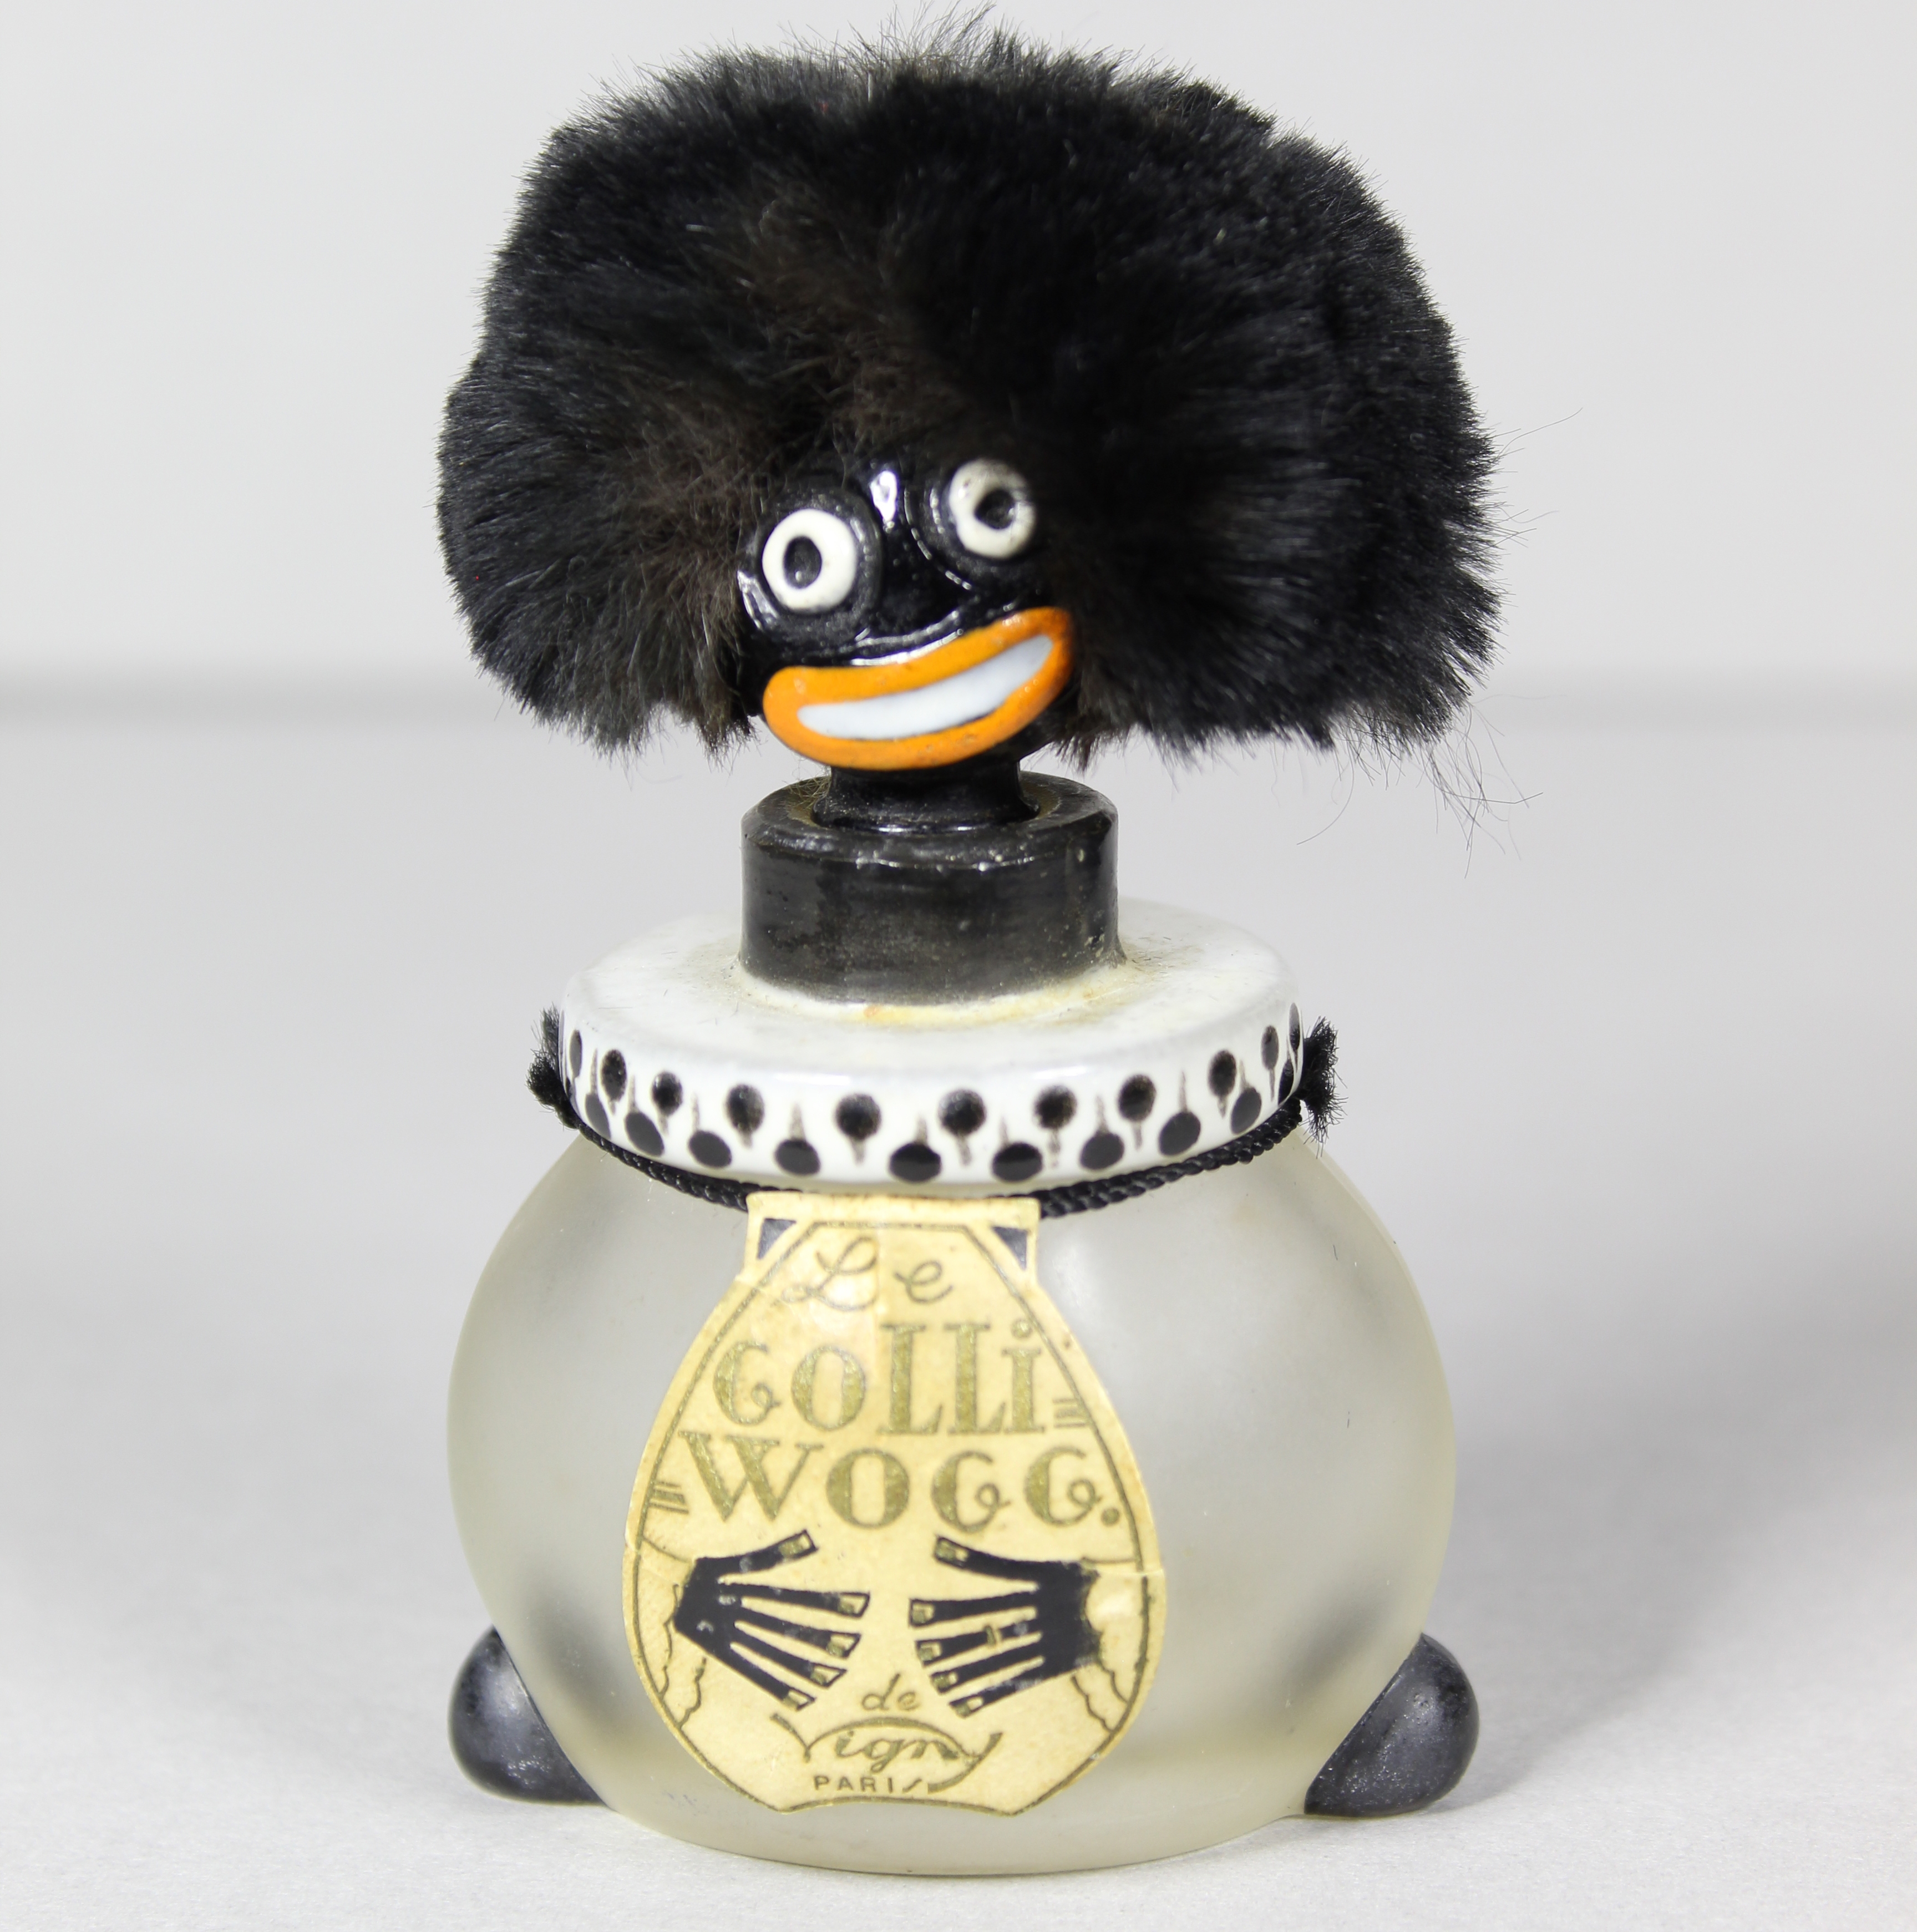 From Our Permanent Collection: The Golliwogg - Reginald F. Lewis